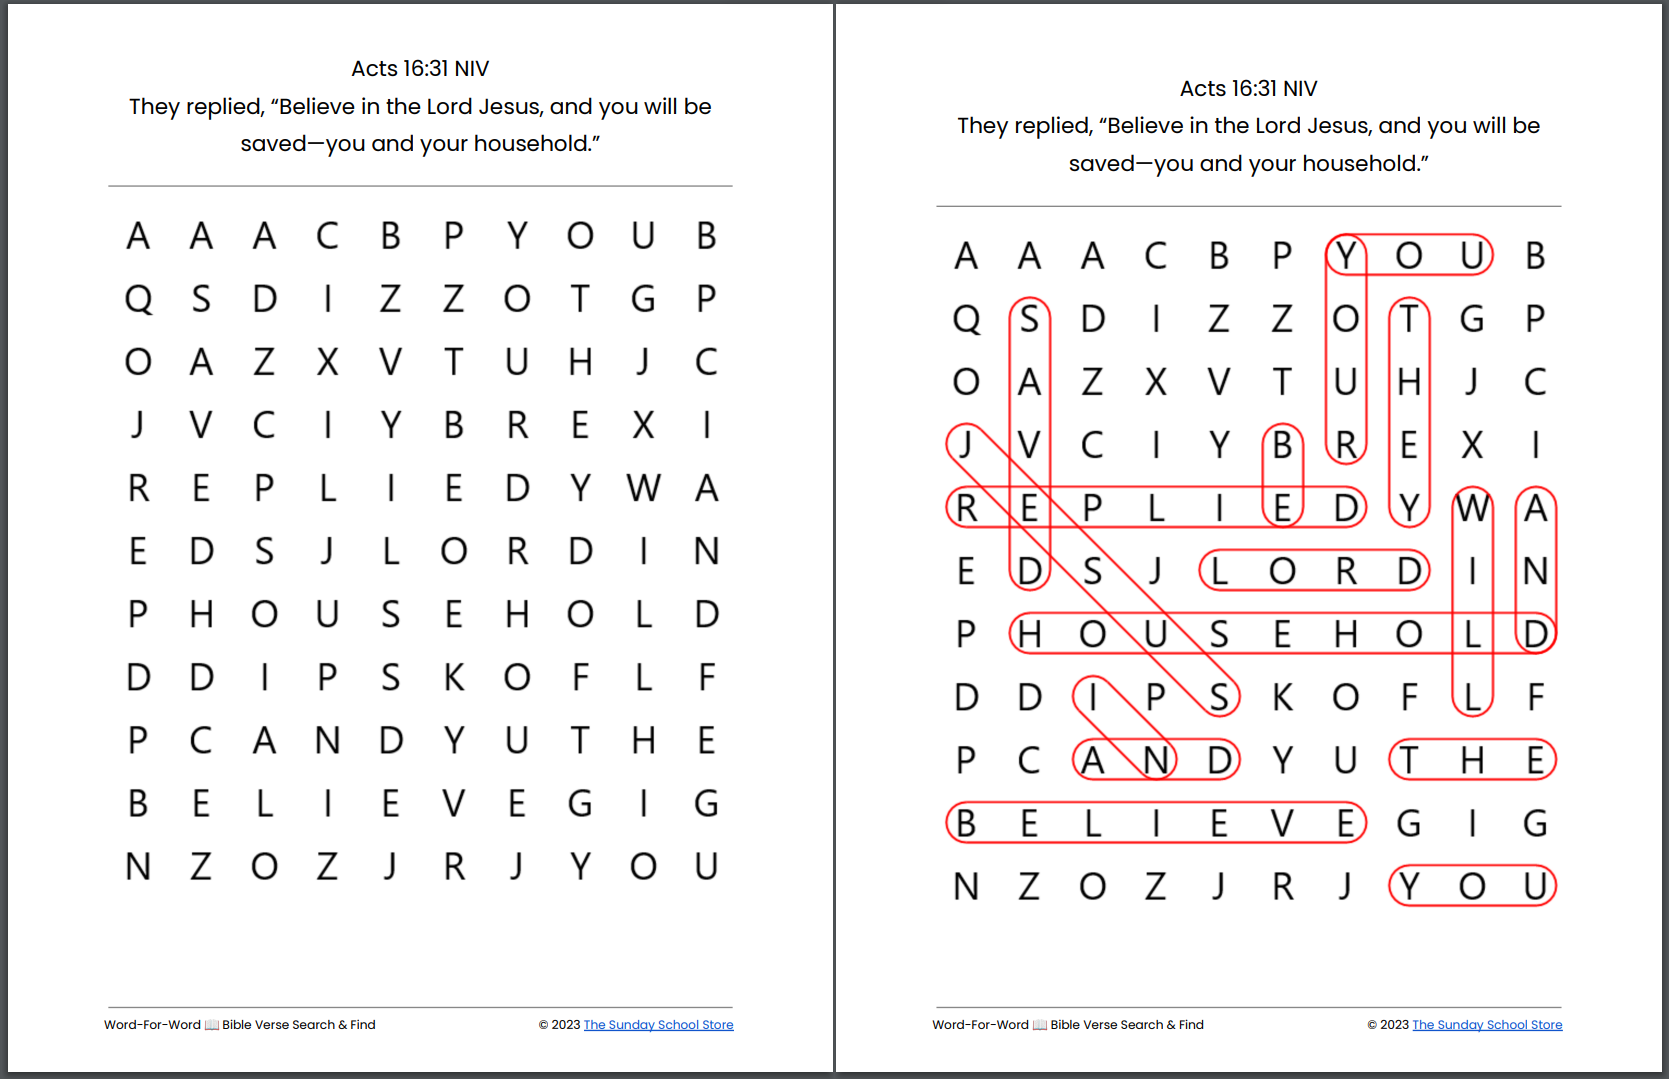 Stream [@ Bible Activities For Kids ages 8-12, Word Search, Fill-In-The  Blank, Word Scramble [Read-Full@ by User 126282837